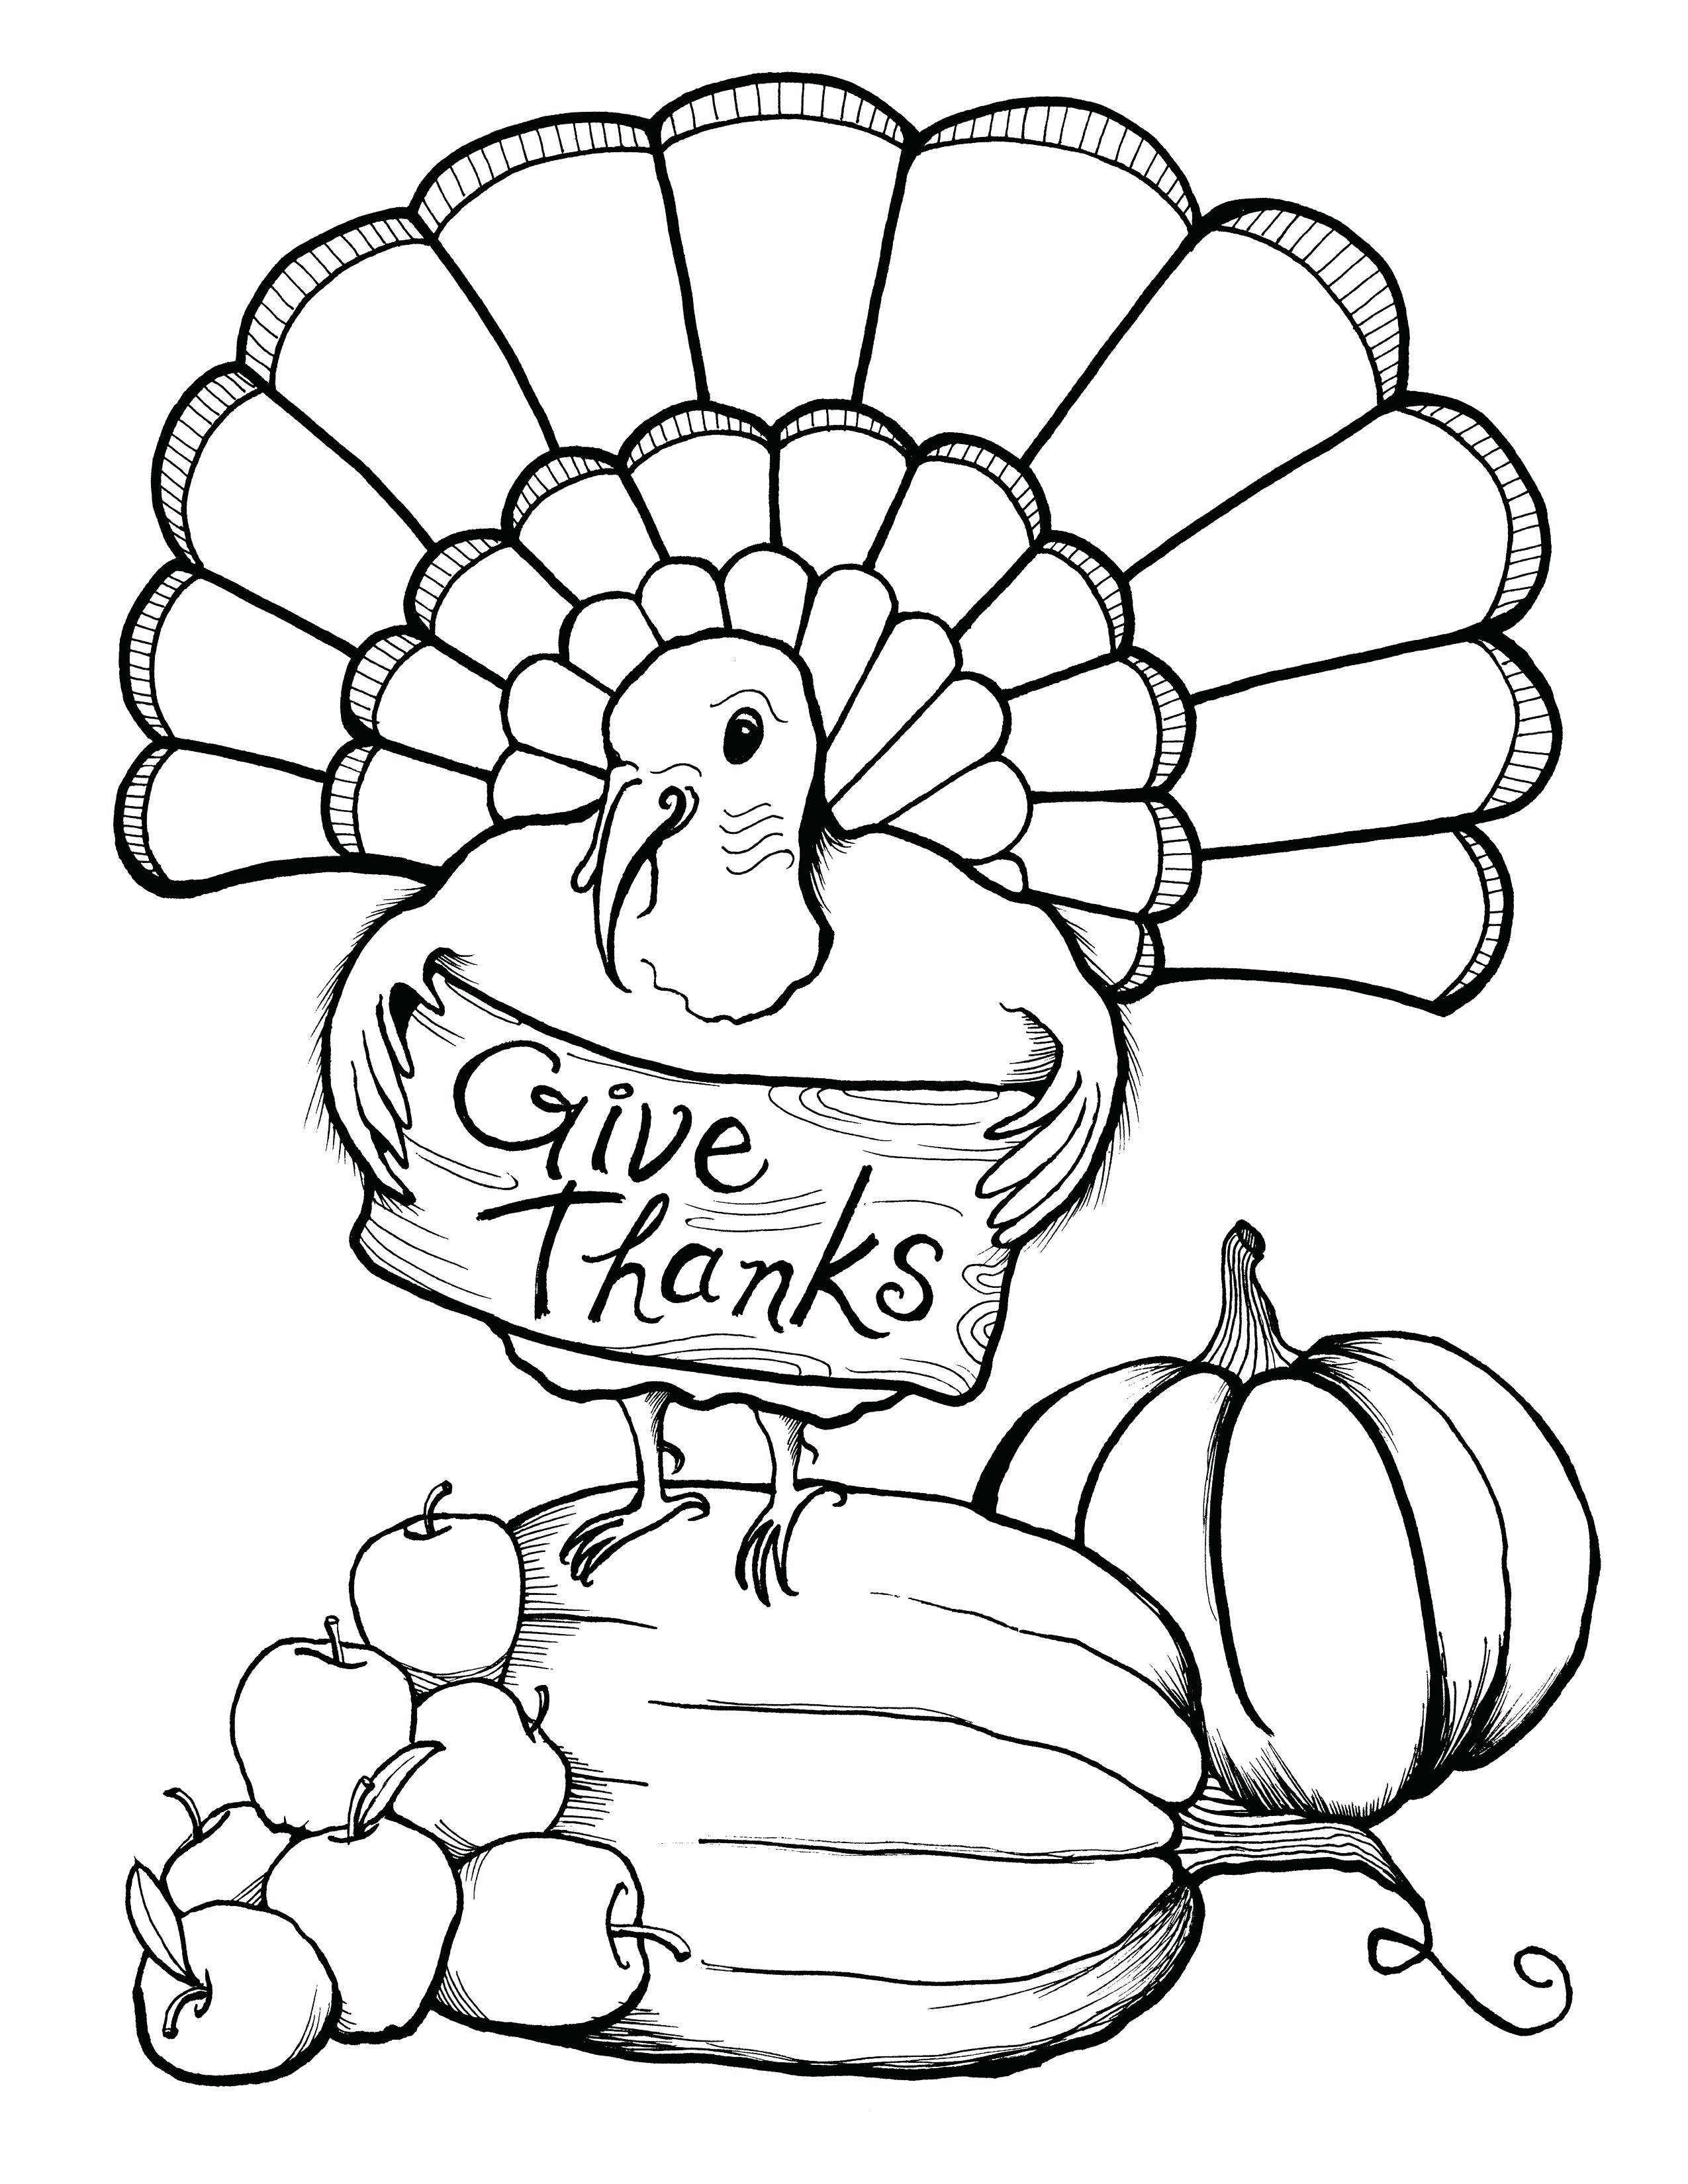 New Thanksgiving Coloring Pages Printable Pdf for Adult